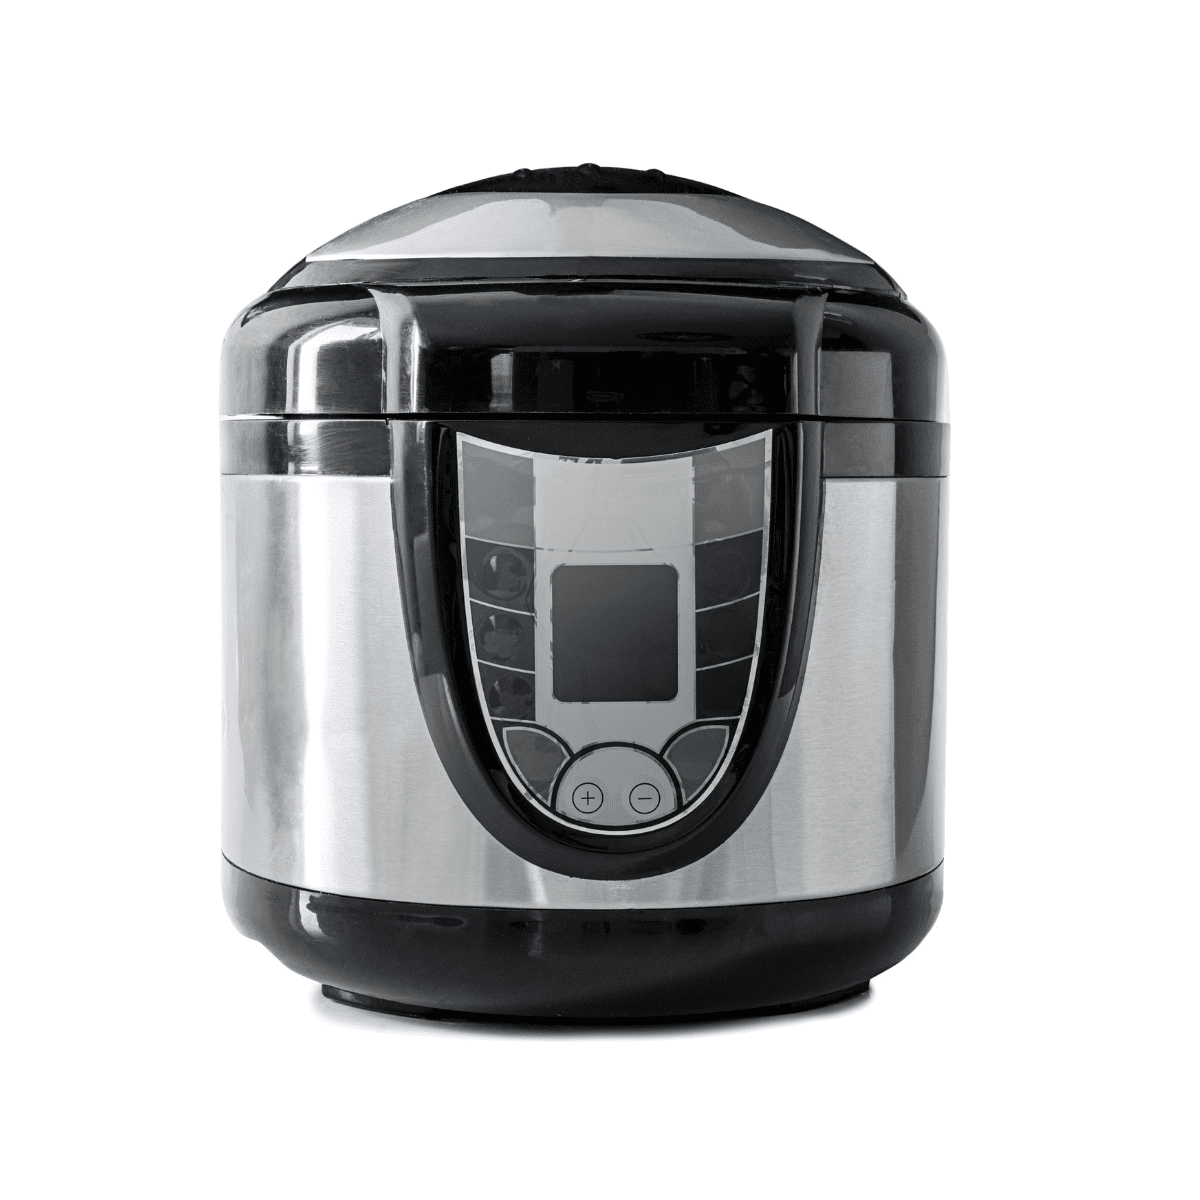 An electric pressure cooker on a white background.